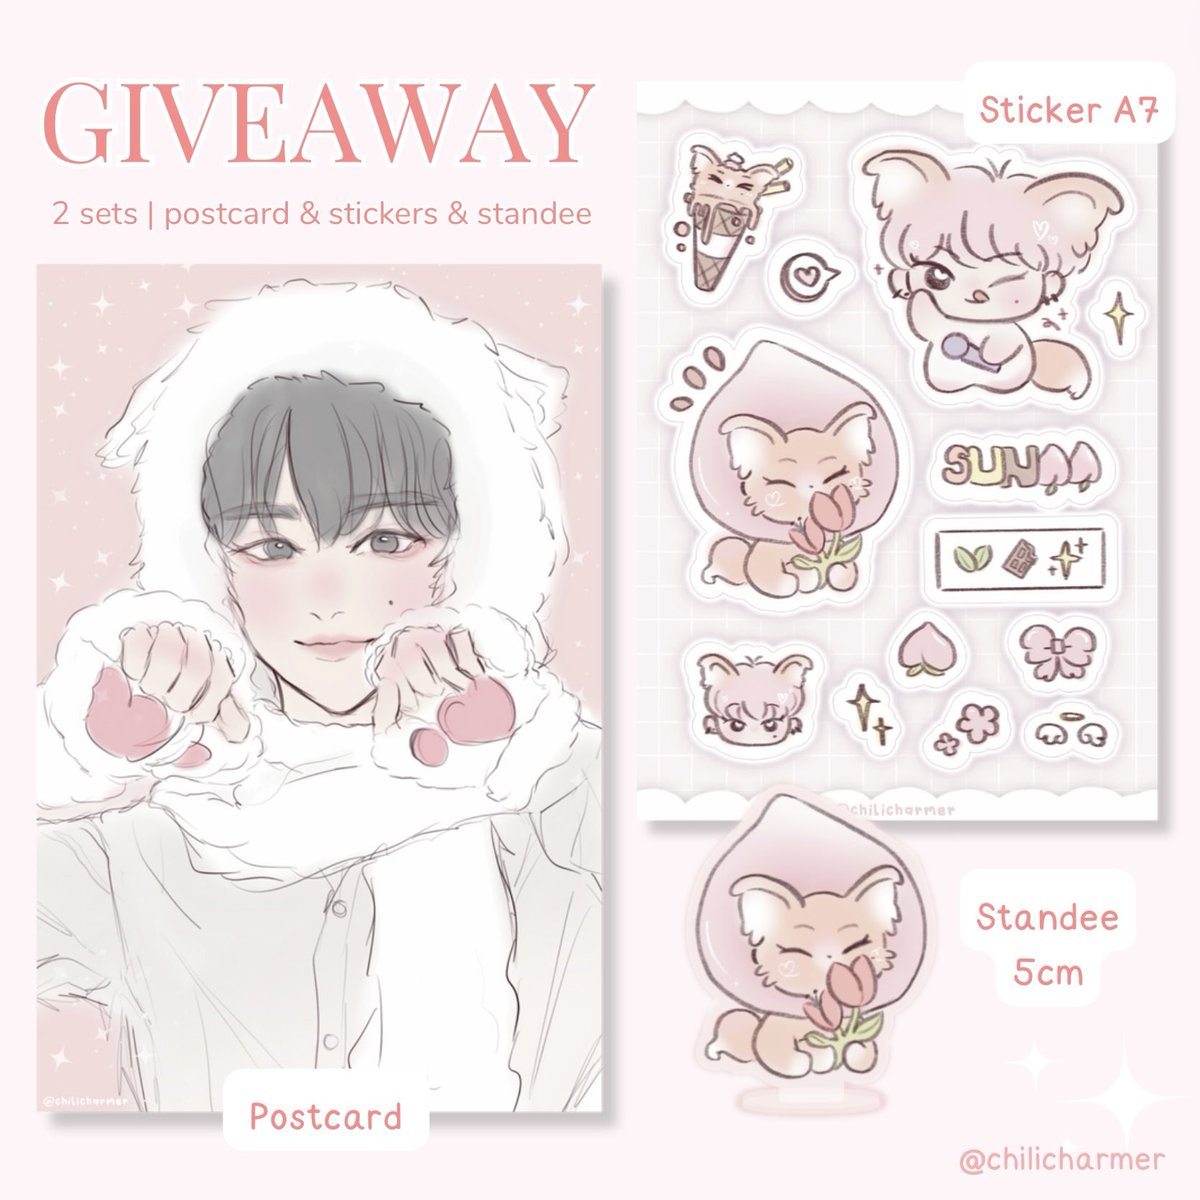 ✩‧₊˚ 𝐆𝐢𝐯𝐞𝐚𝐰𝐚𝐲 𝐒𝐮𝐧𝐨𝐨’𝐬 𝐁𝐢𝐫𝐭𝐡𝐝𝐚𝐲 *･῾ ᵎ 

only 2 set included ;
🎀 1 postcard
💗 1 sticker a7
🌷 1 acrylic standee 5 cm

gg form ; sat 22 june 2024 (20.00)

#HappySunooDay